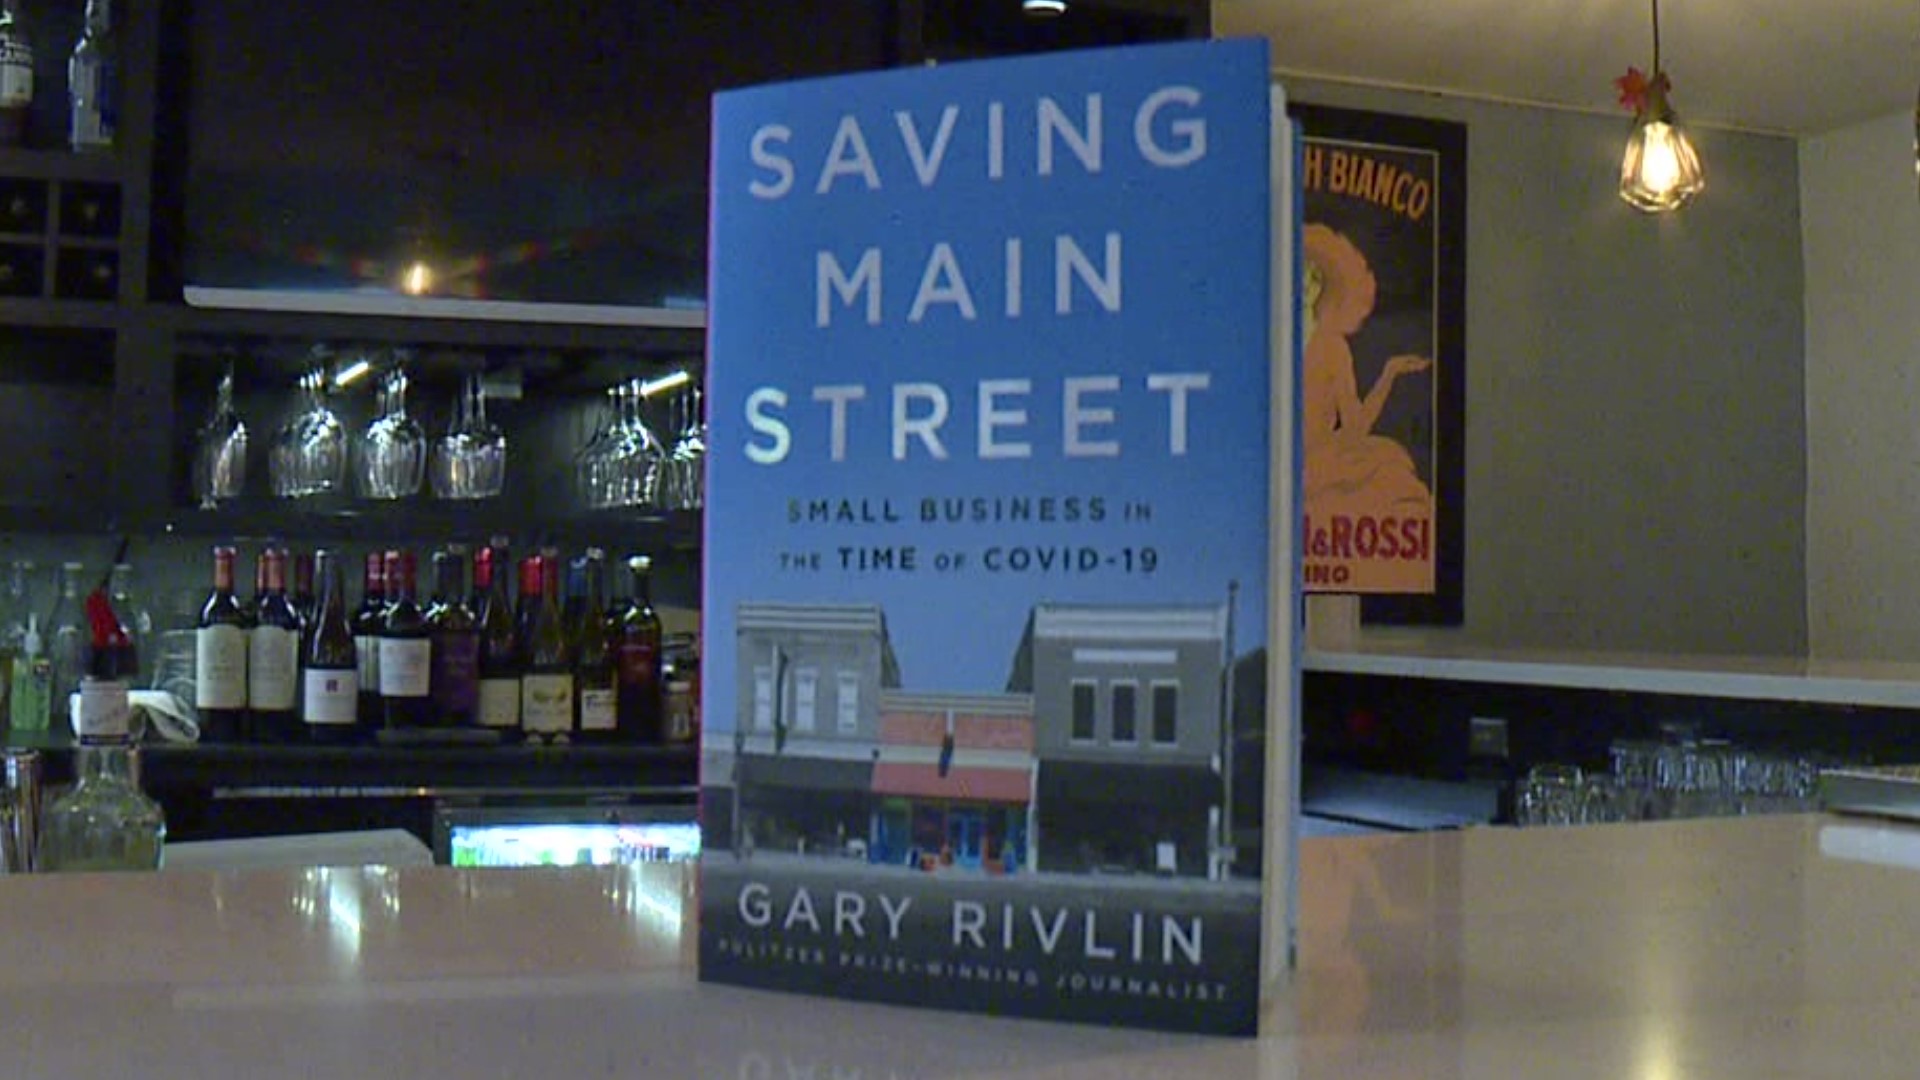 Newswatch 16's Courtney Harrison spoke with the author and one of the small business owners featured about sharing these stories.